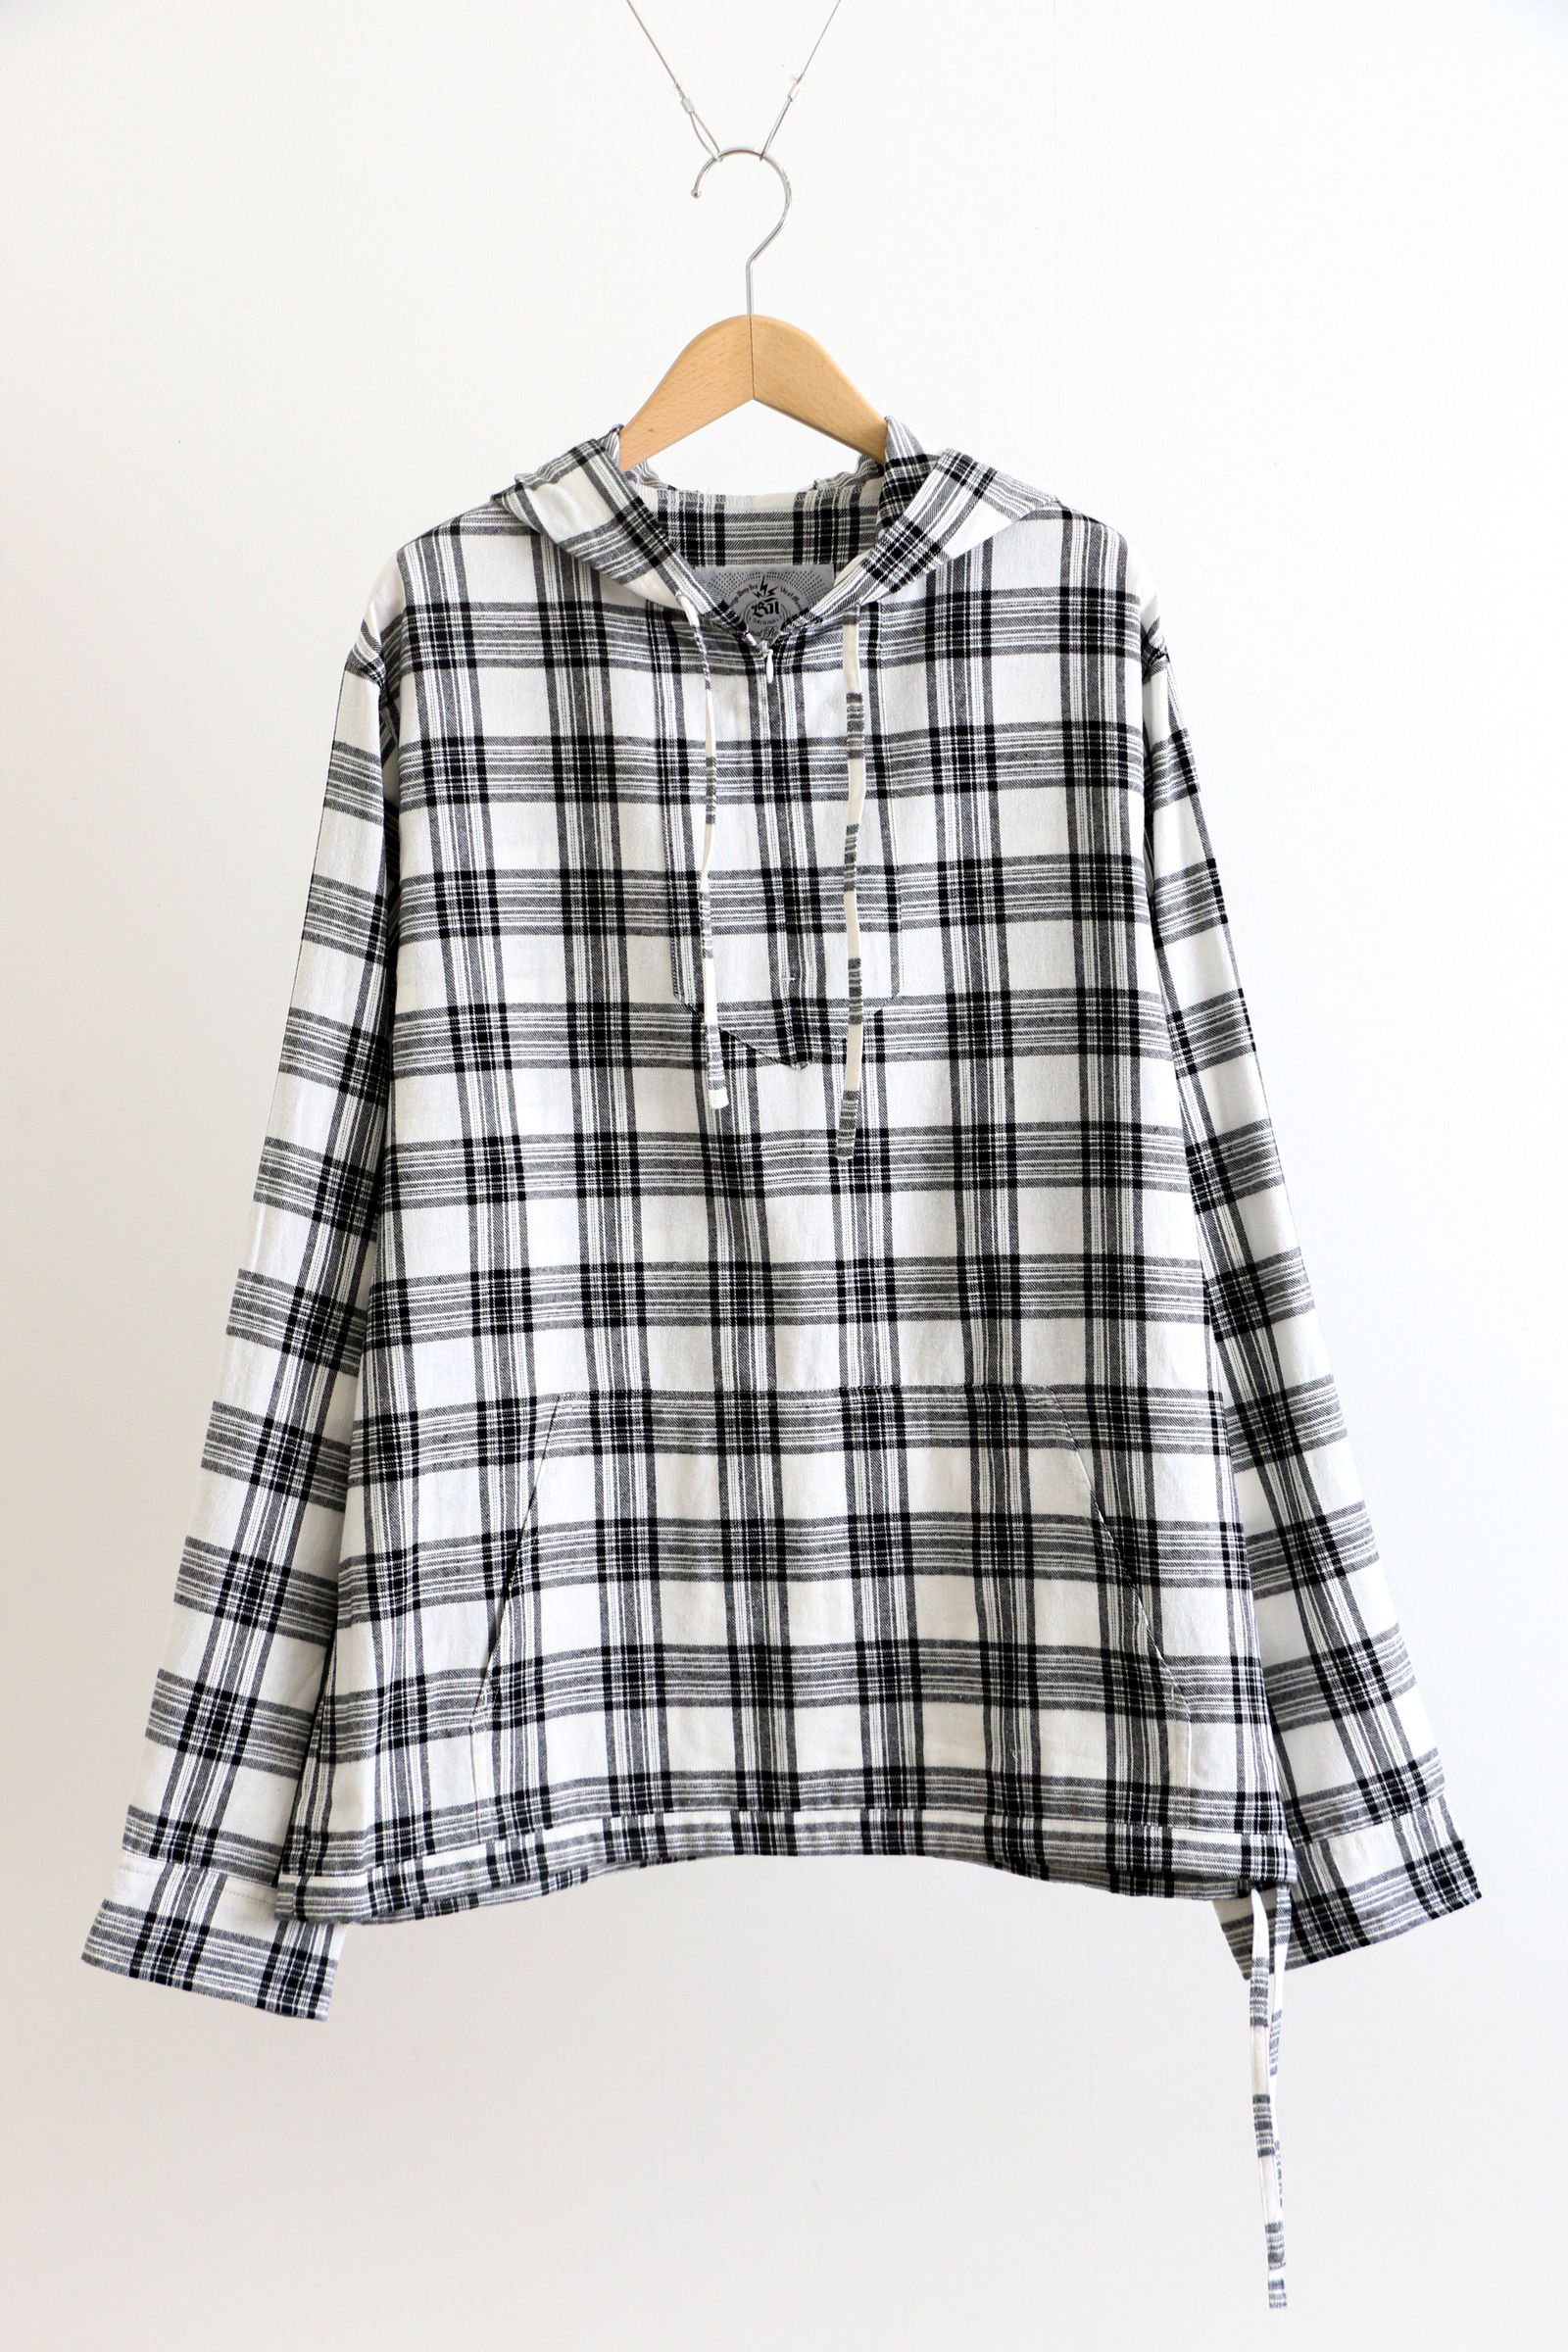 PULLOVER MEXICAN HOODED SHIRT WHITE / プルオーバー / メキシカンパーカー / - L